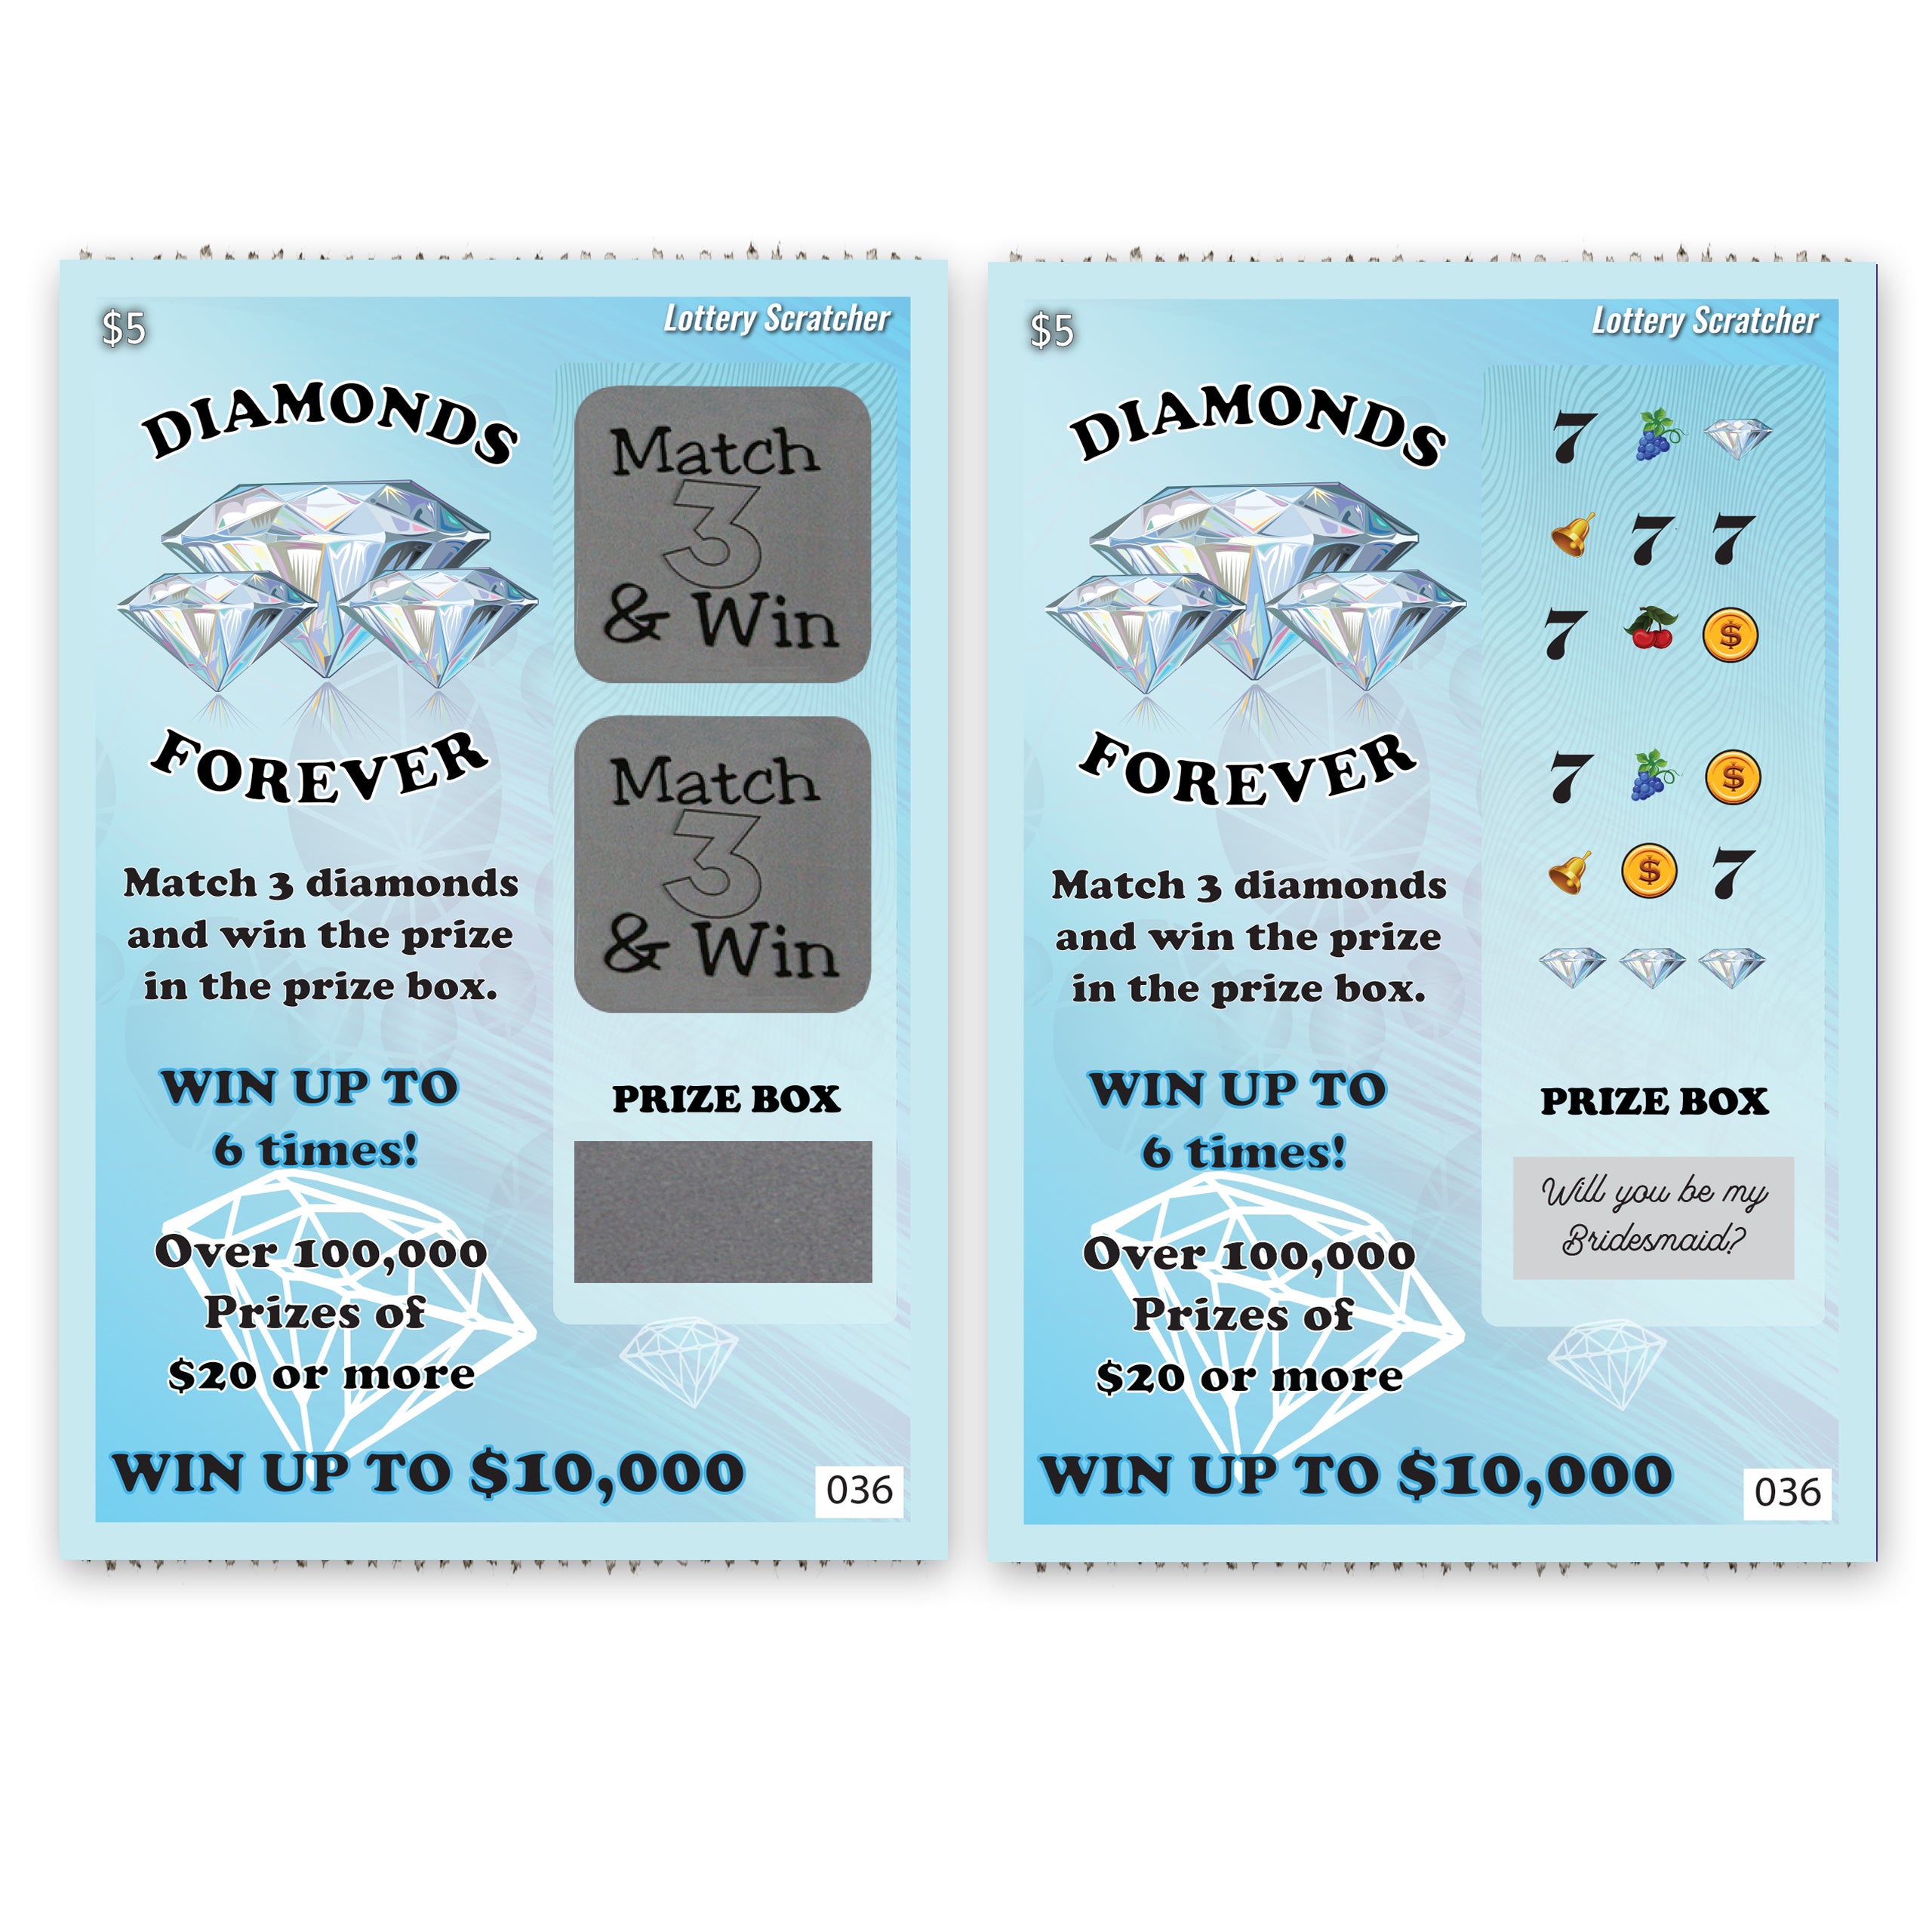 Will You Be My Bridesmaid? Lotto Replica Scratch Off Card 4" x 6" - Blue